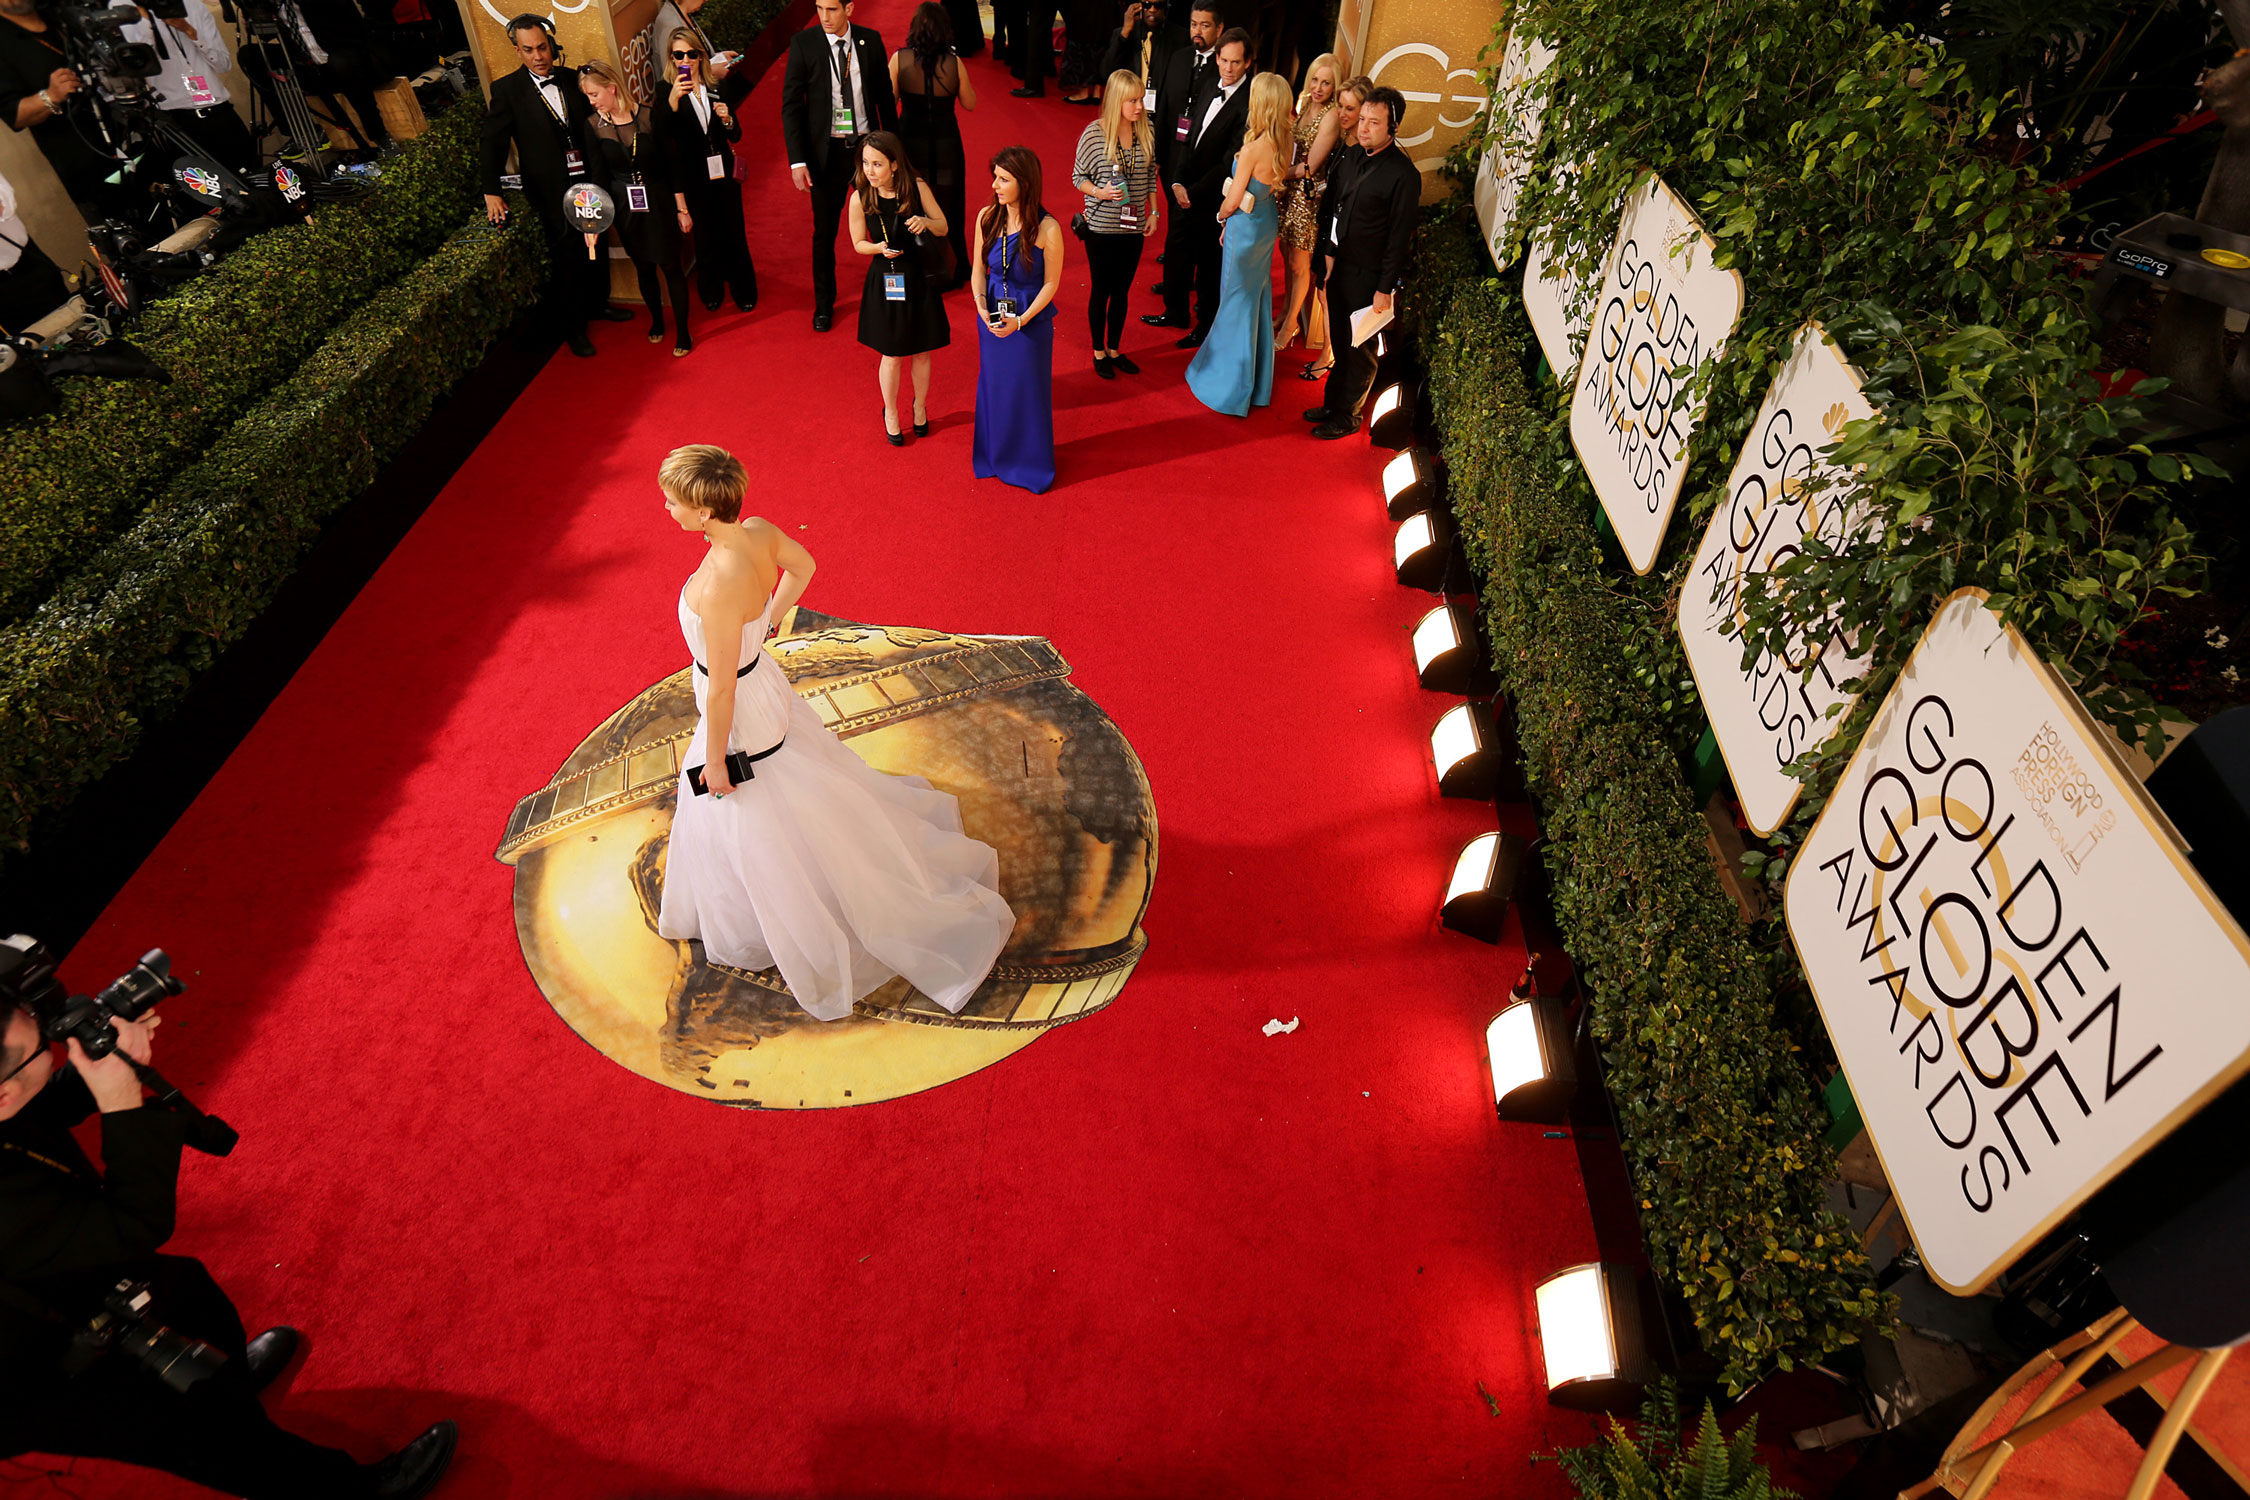 Facebook, not Twitter, will live stream this year’s Golden Globes’ red carpet pre-show